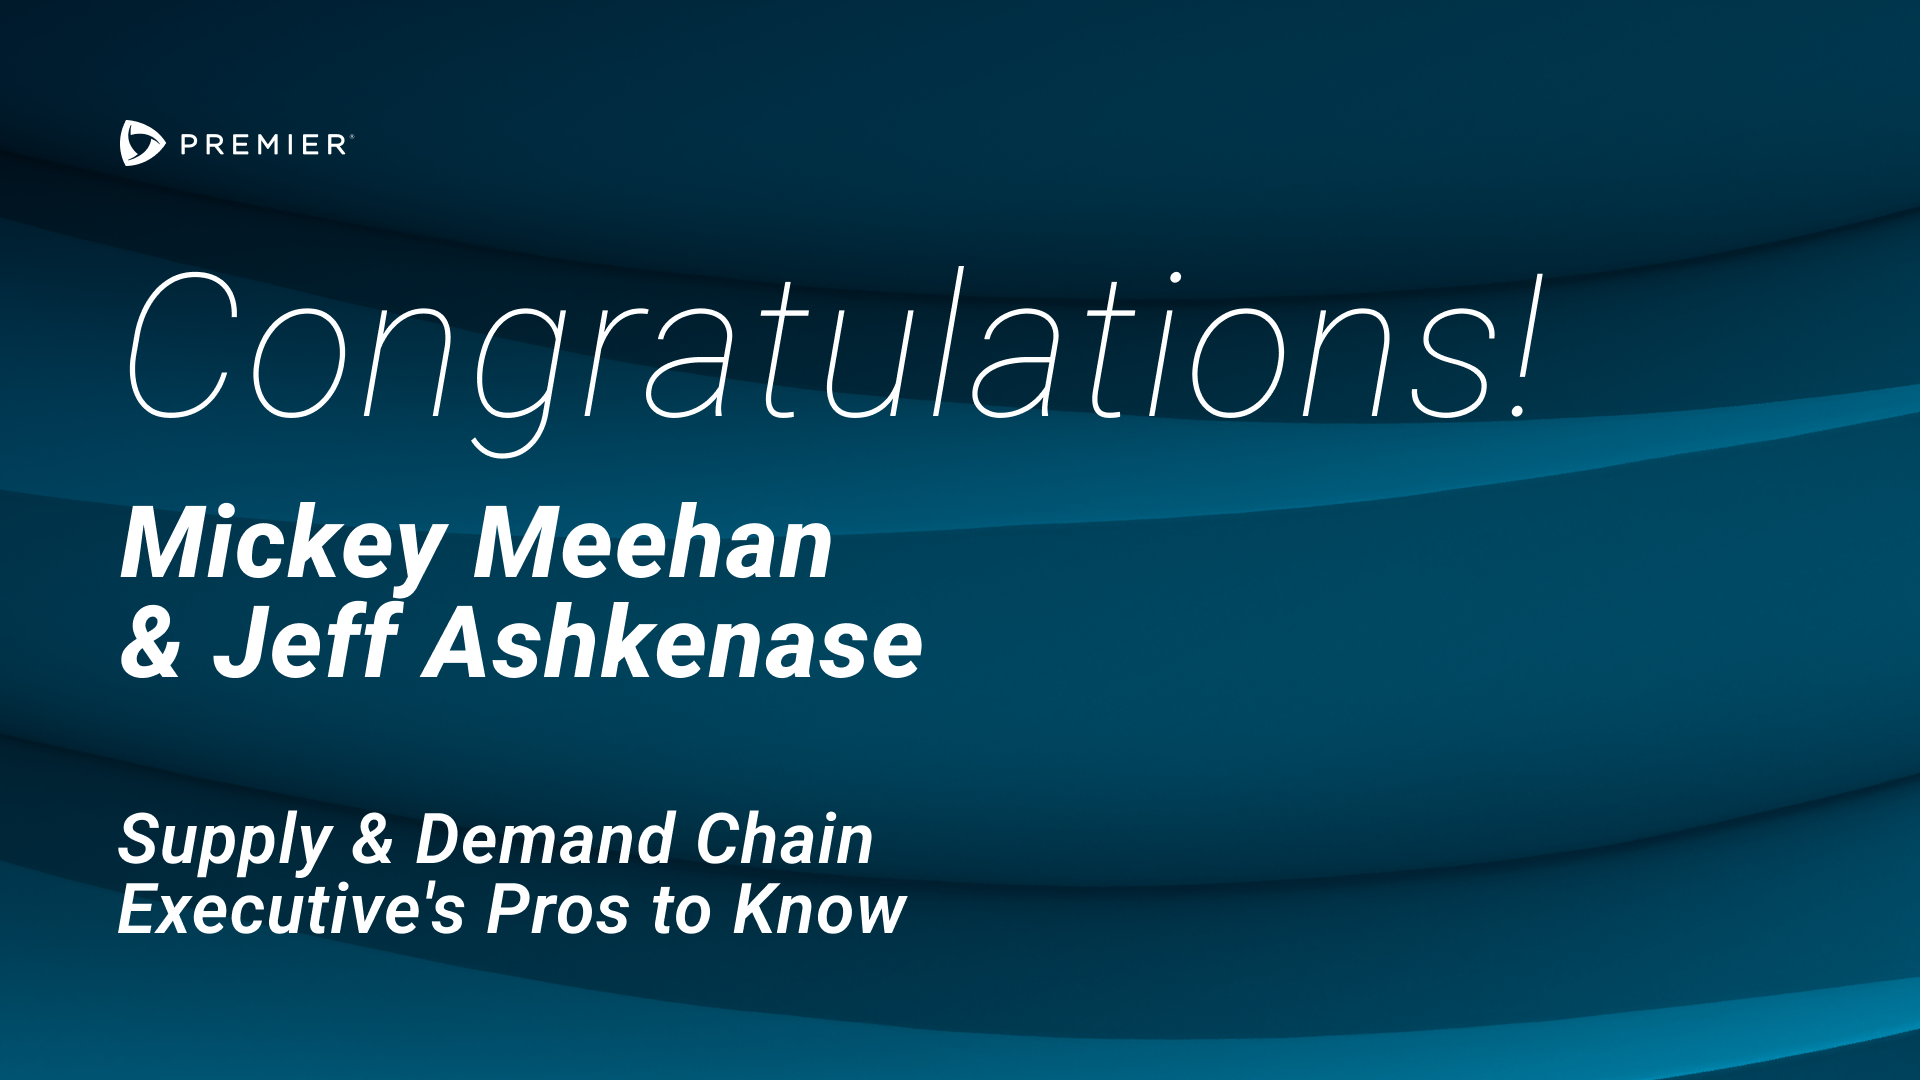 Premier Leaders Recognized as Supply & Demand Chain Executive’s Pros to Know